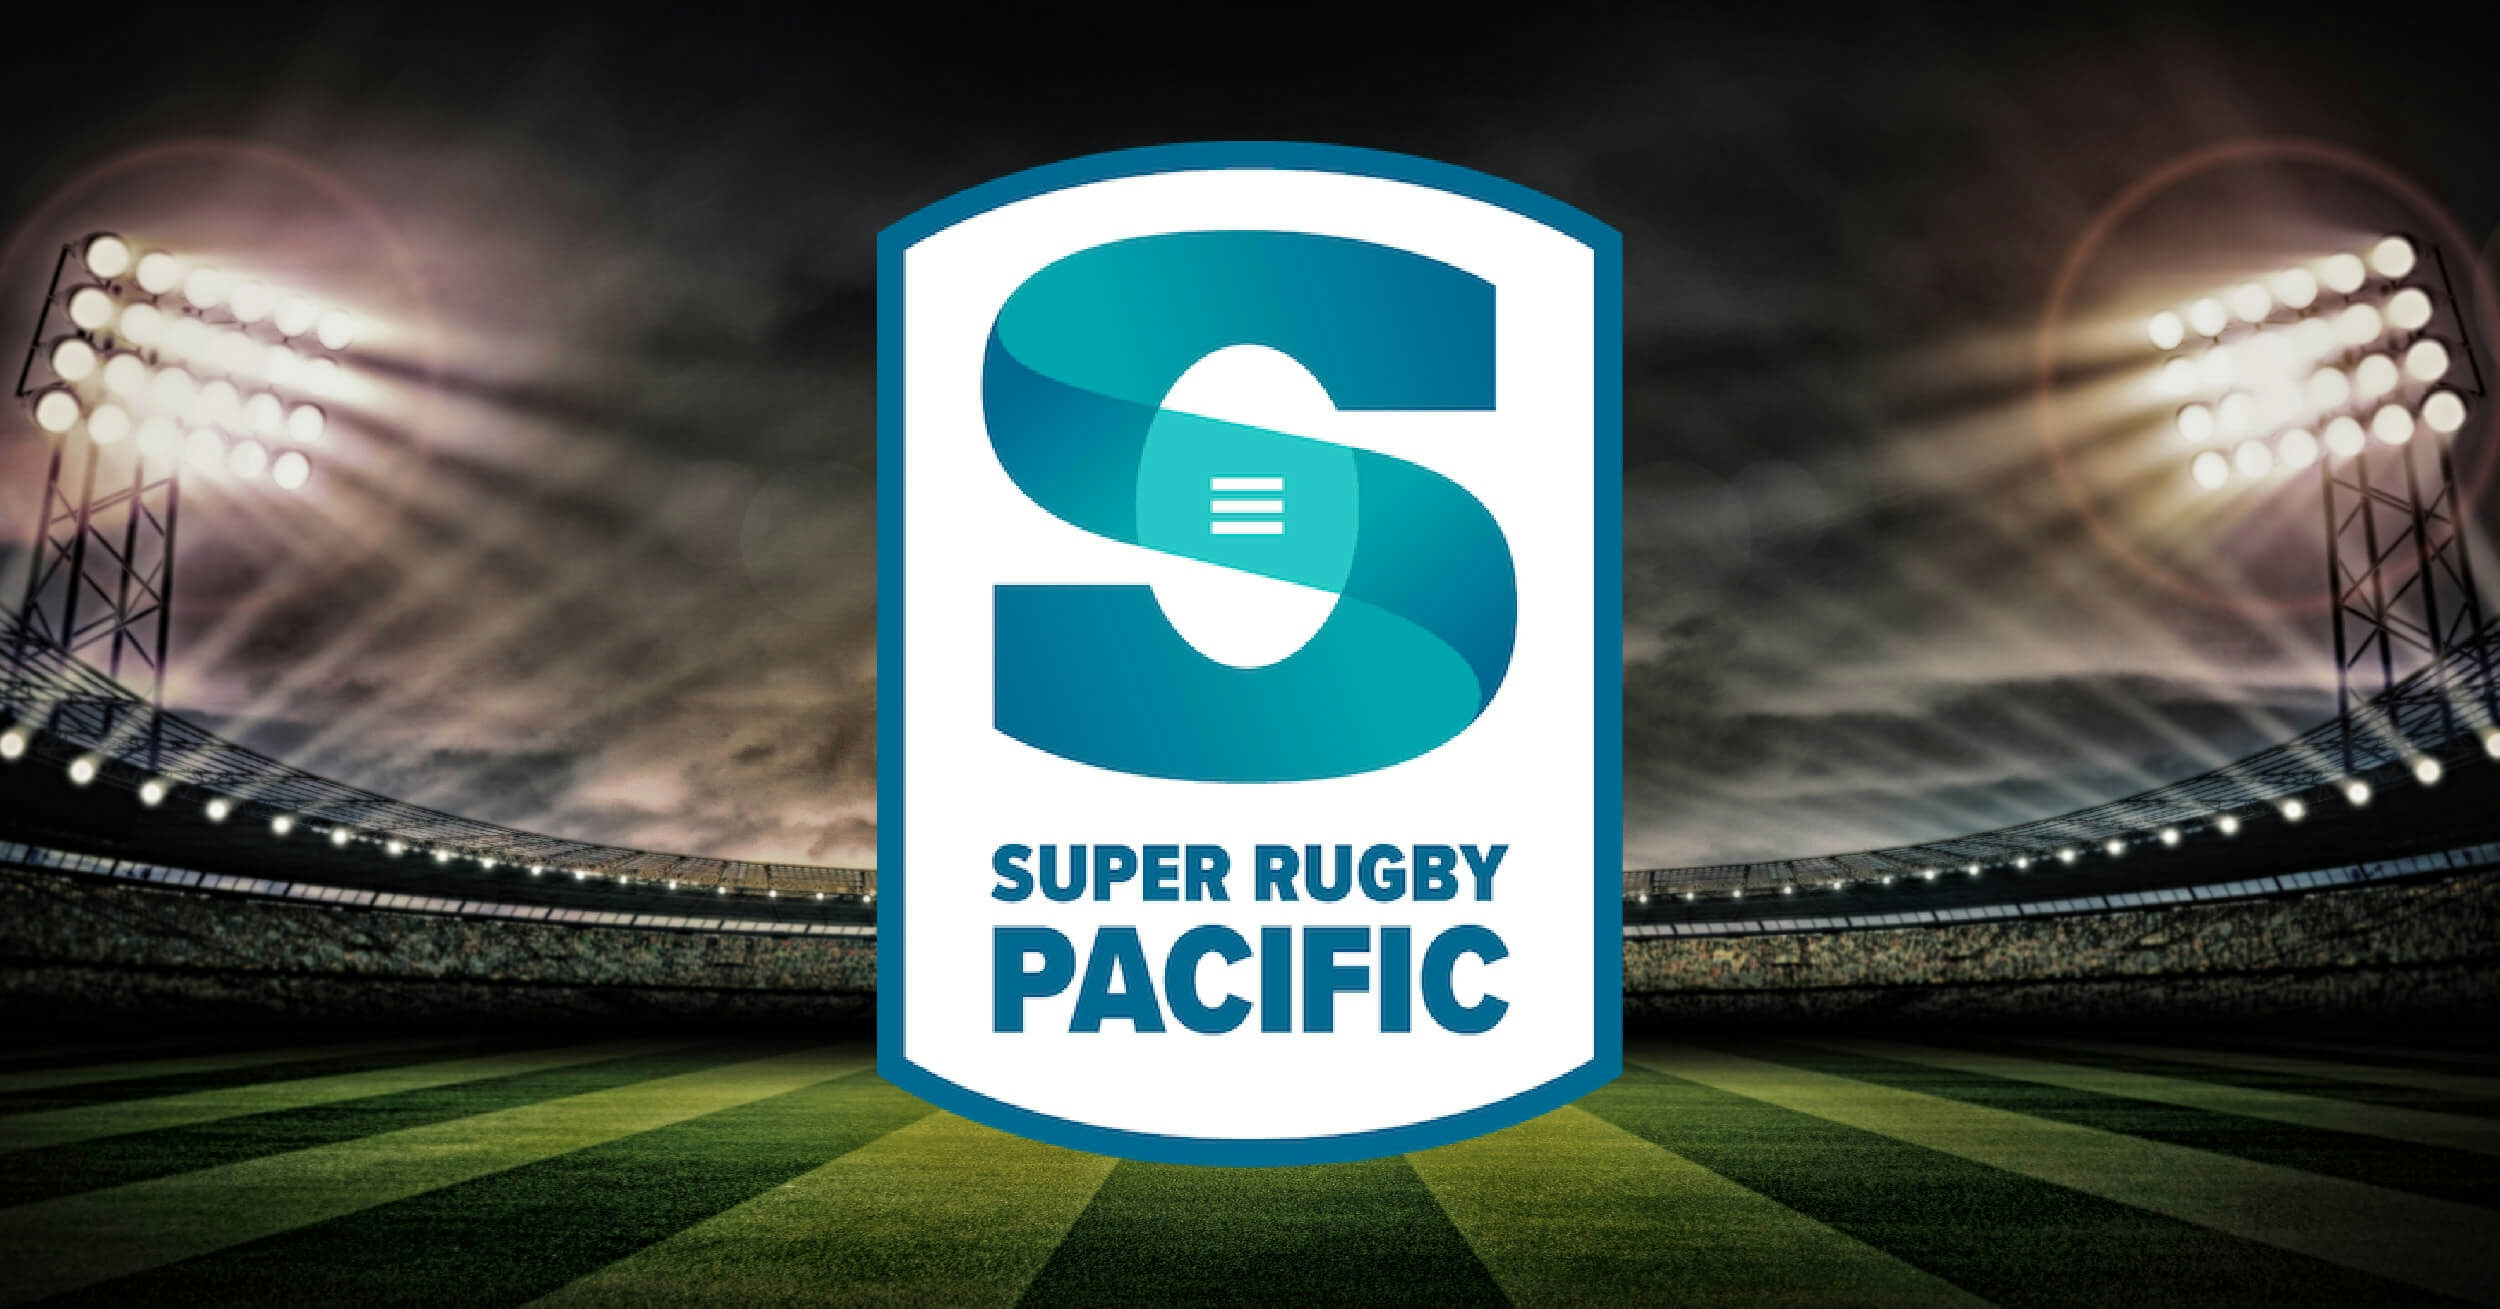 The Super Rugby logo, with the text "Super Rugby Pacific", and a rugby field in the background